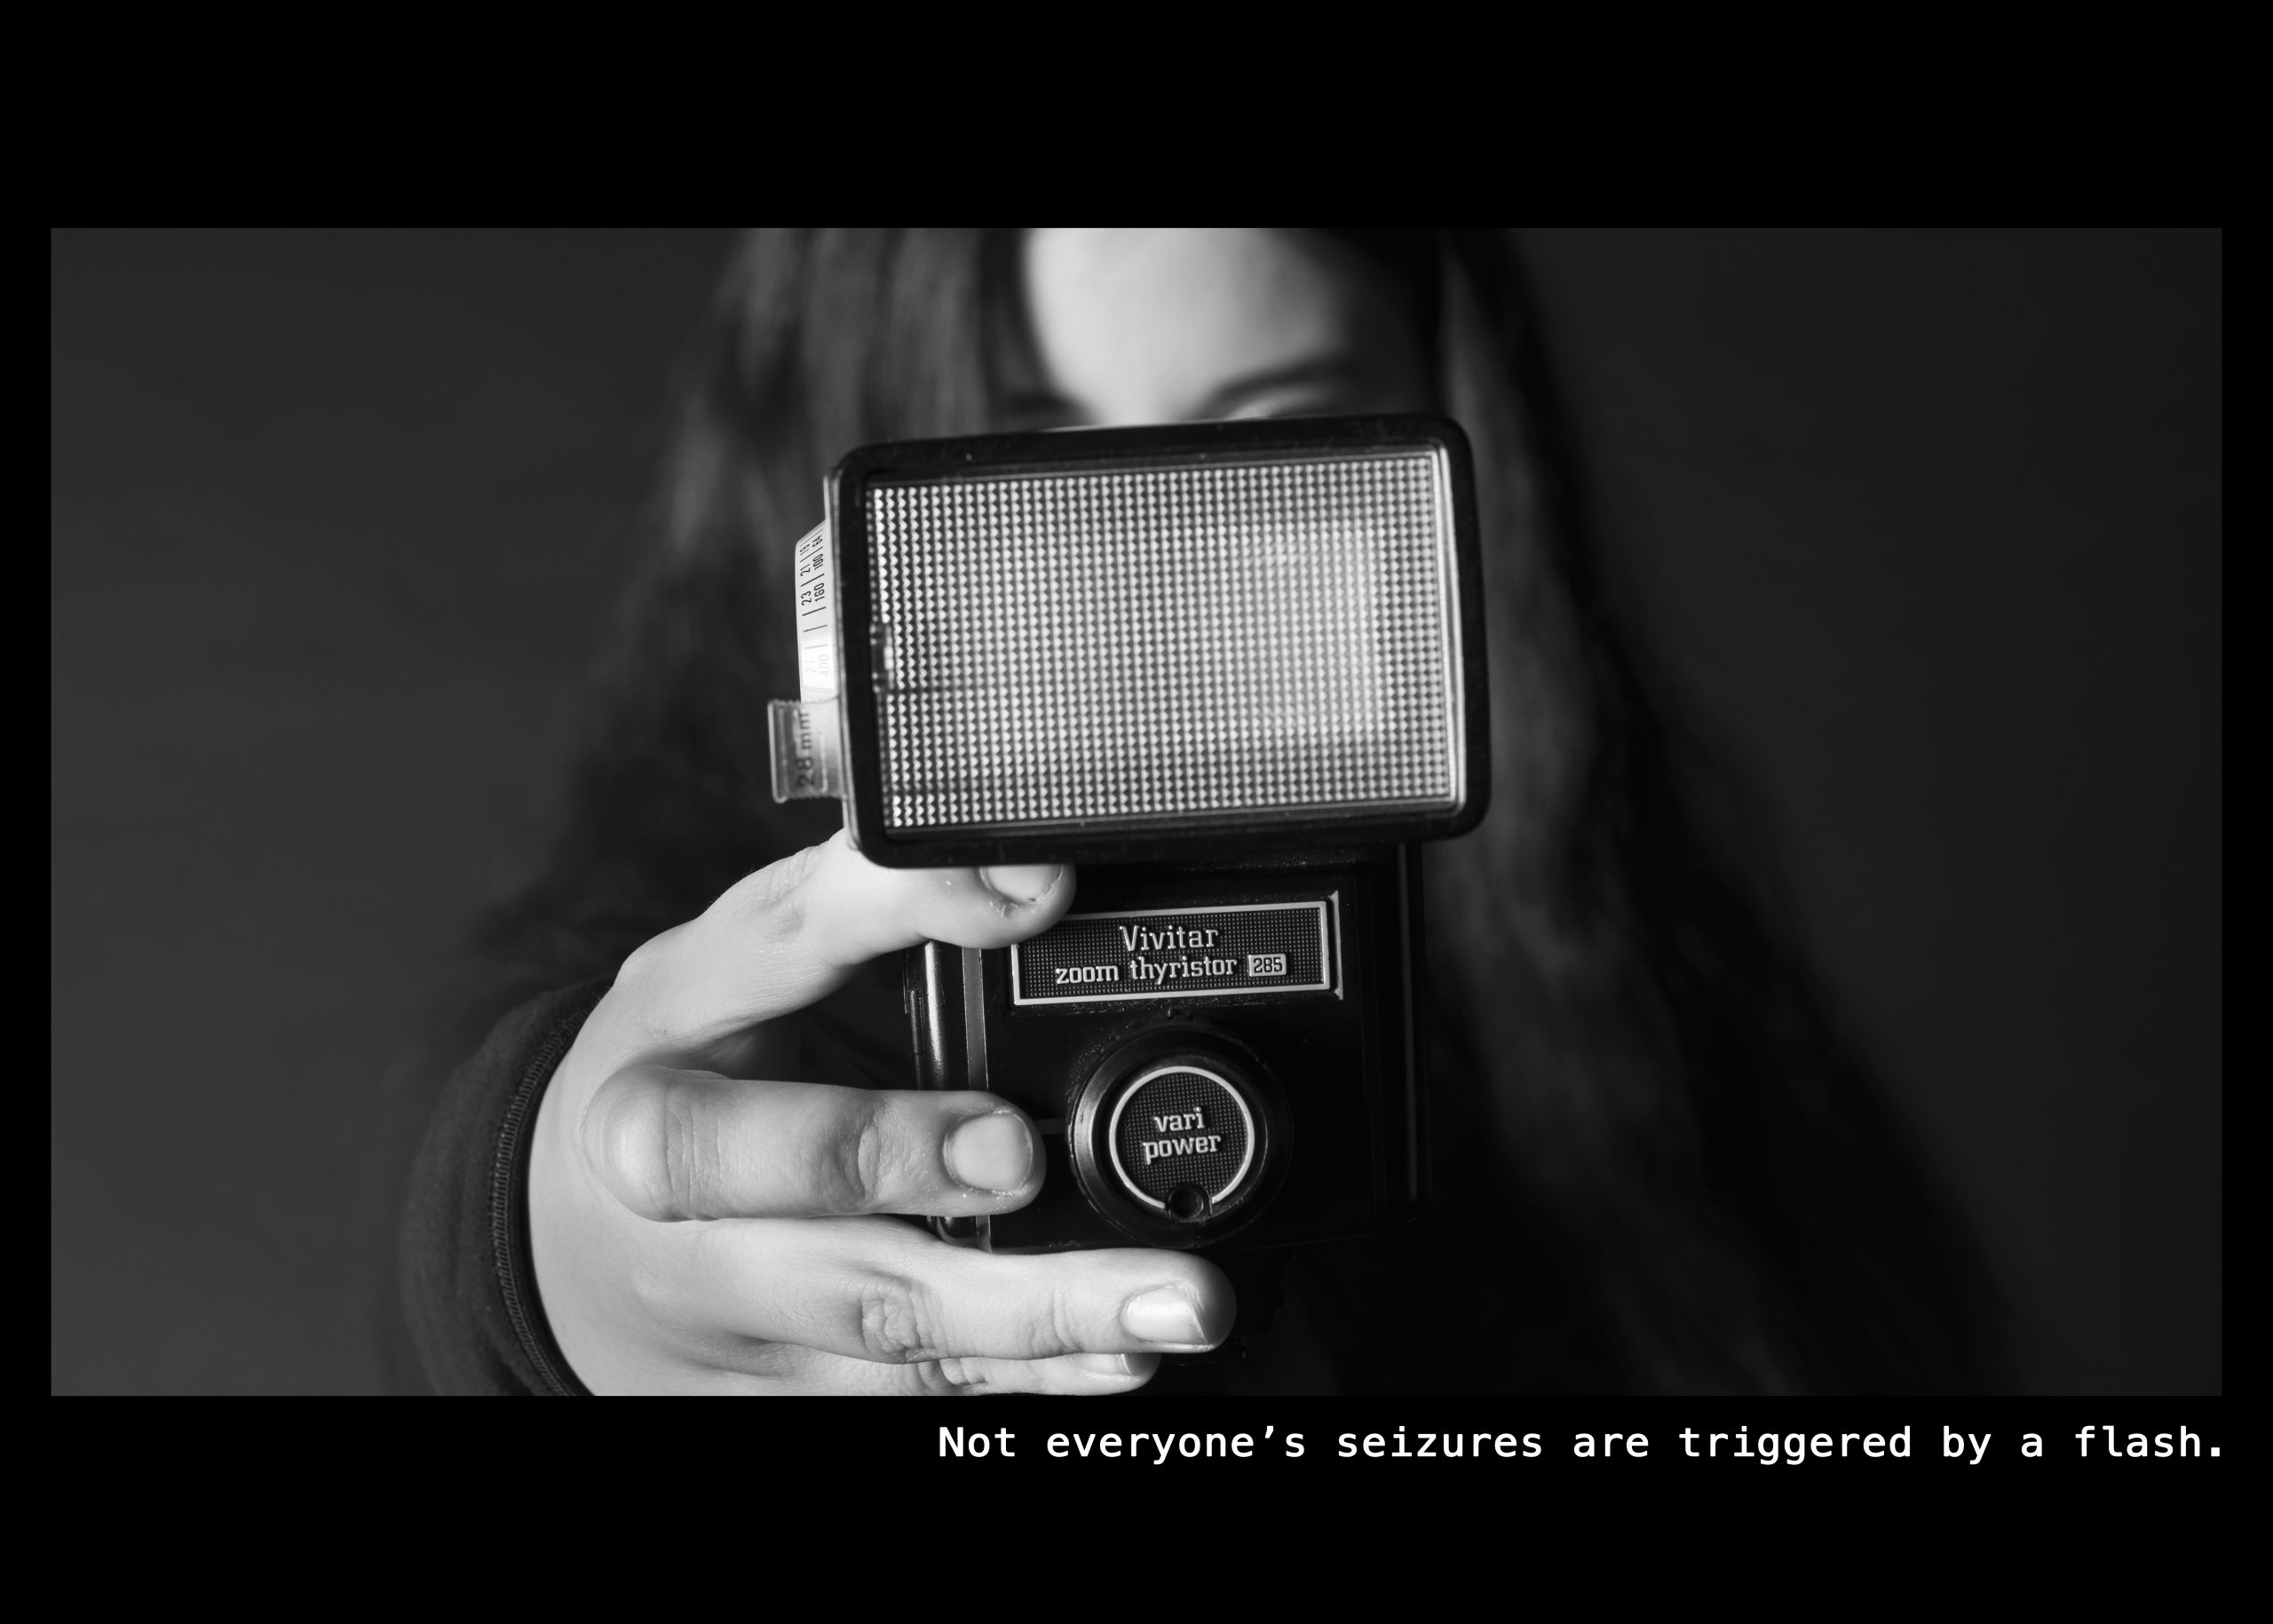 Image of a woman holding a flash for a camera Text: Not everyone's seizures are triggered by a flash.